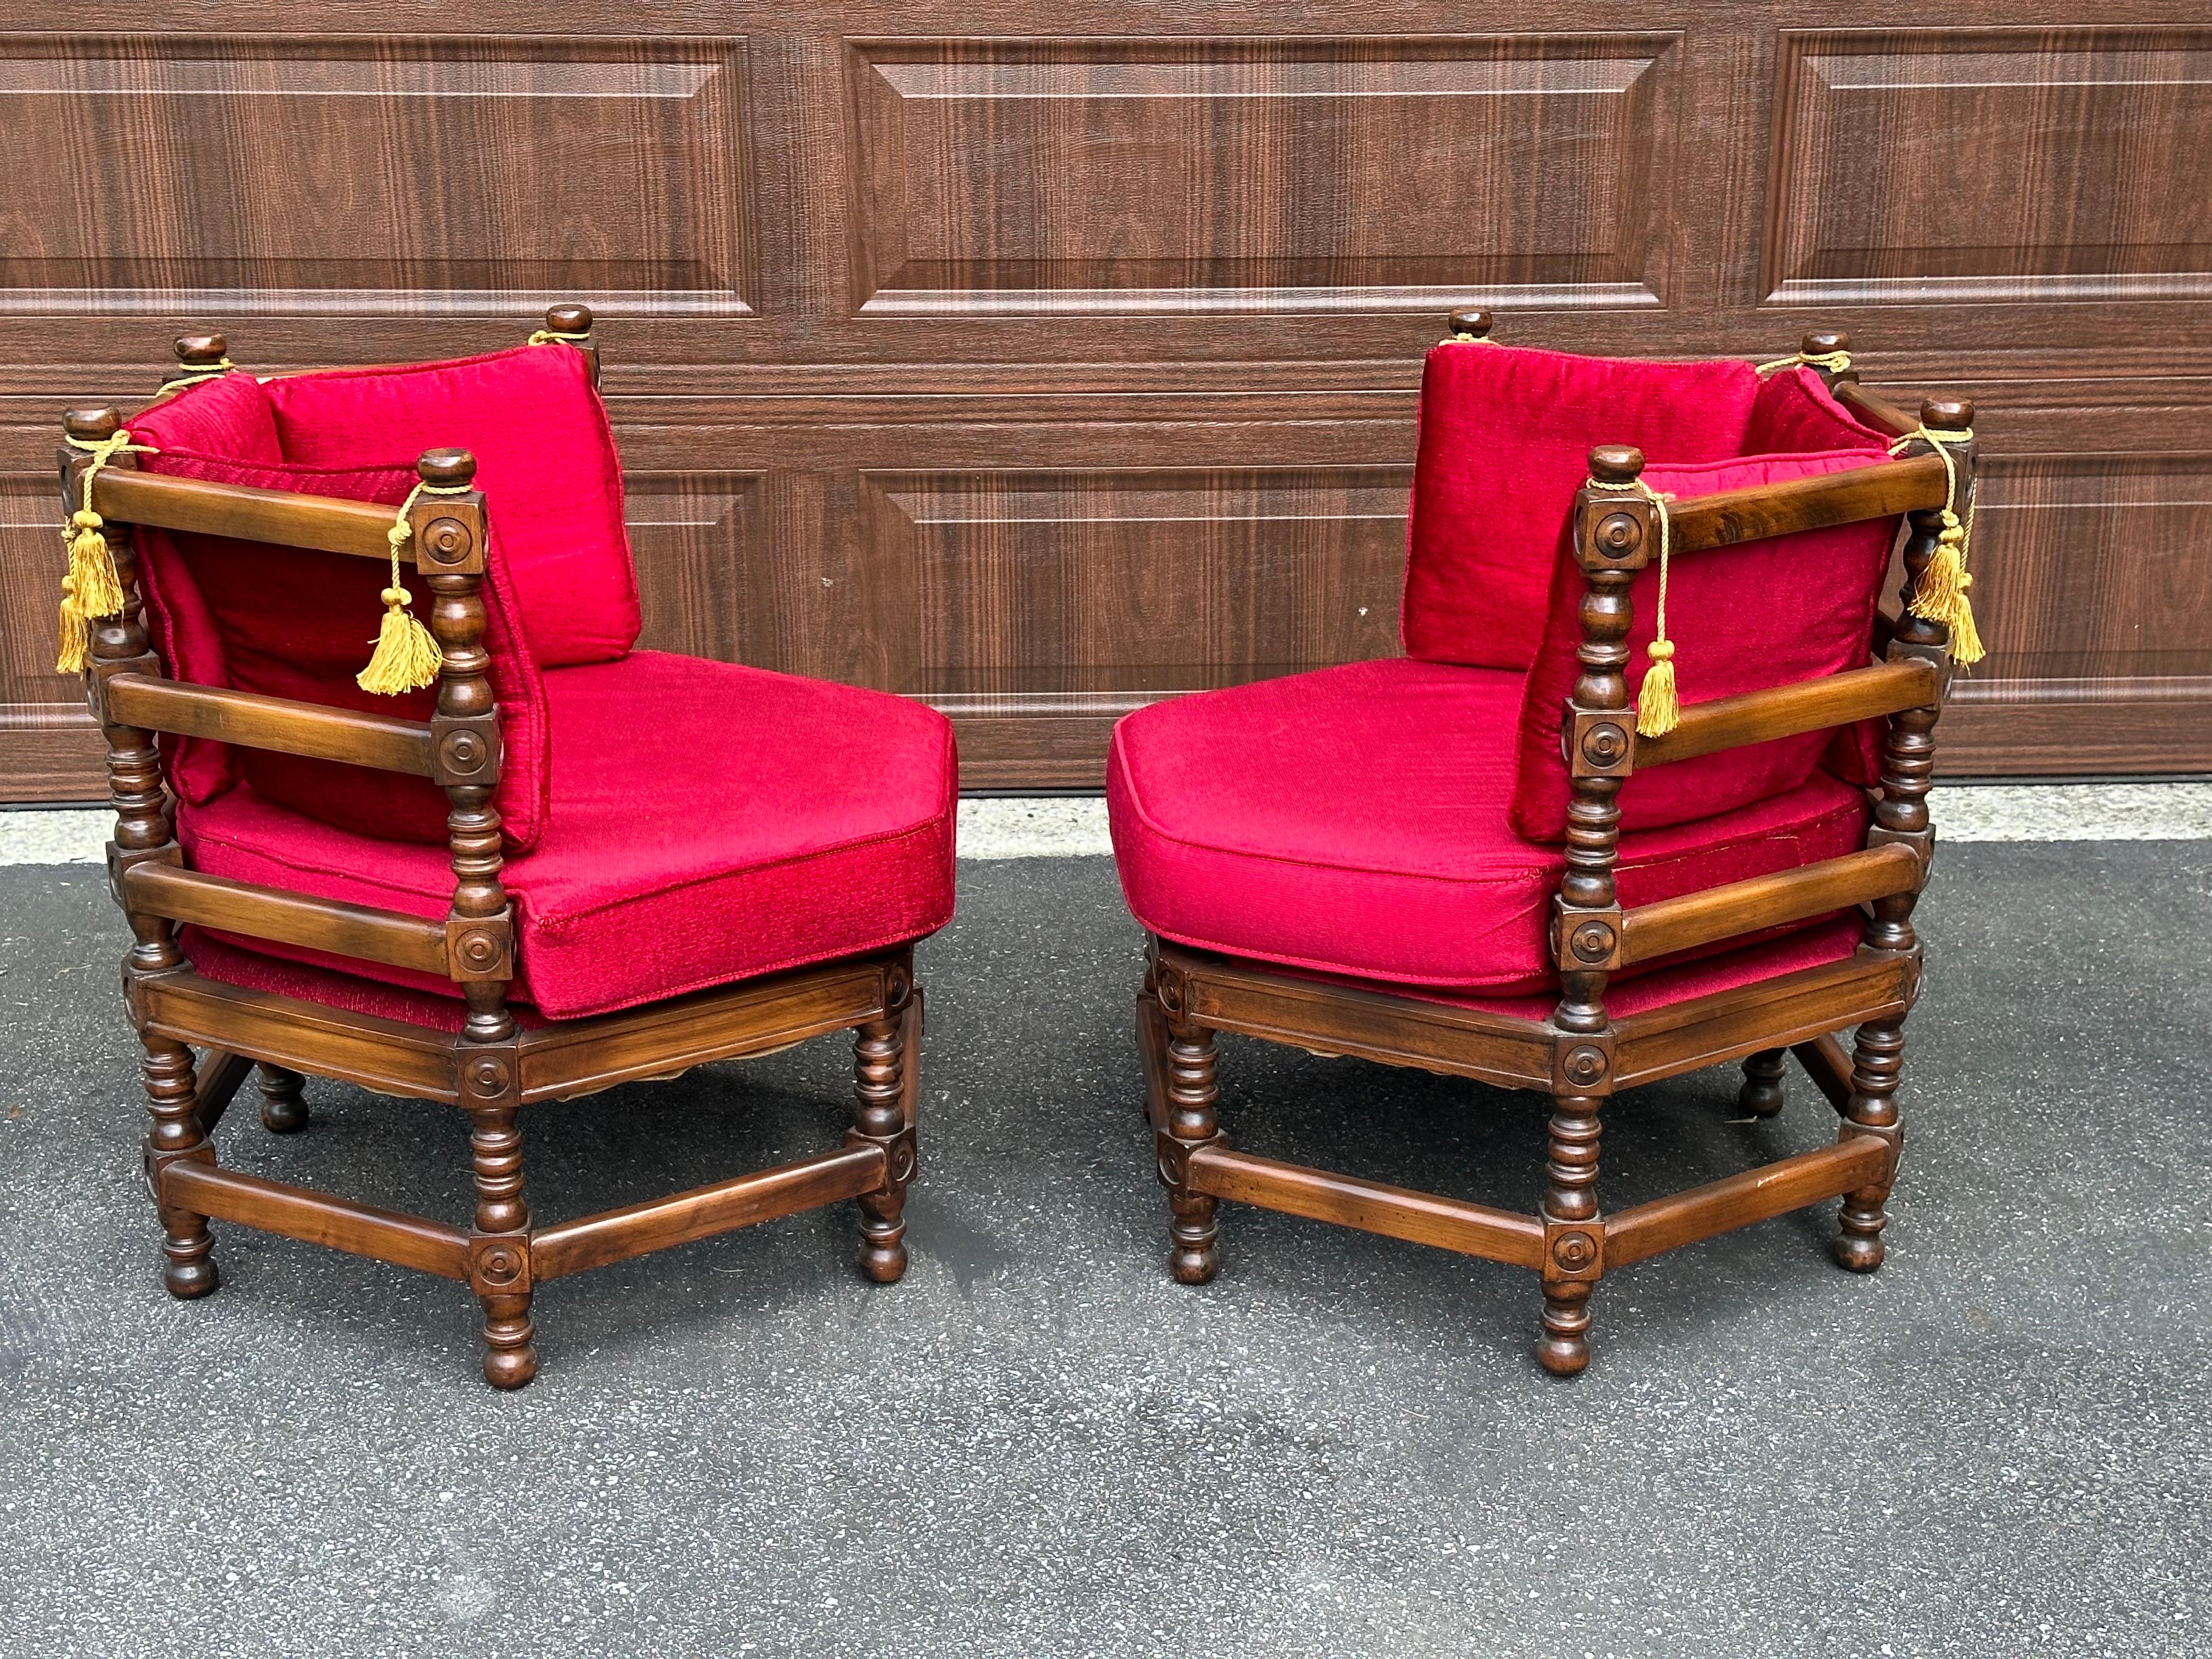 Mediterranean Spanish Revival Boho Chic Hexagonal Chairs - Showpieces by Lewitte In Good Condition For Sale In Kennett Square, PA